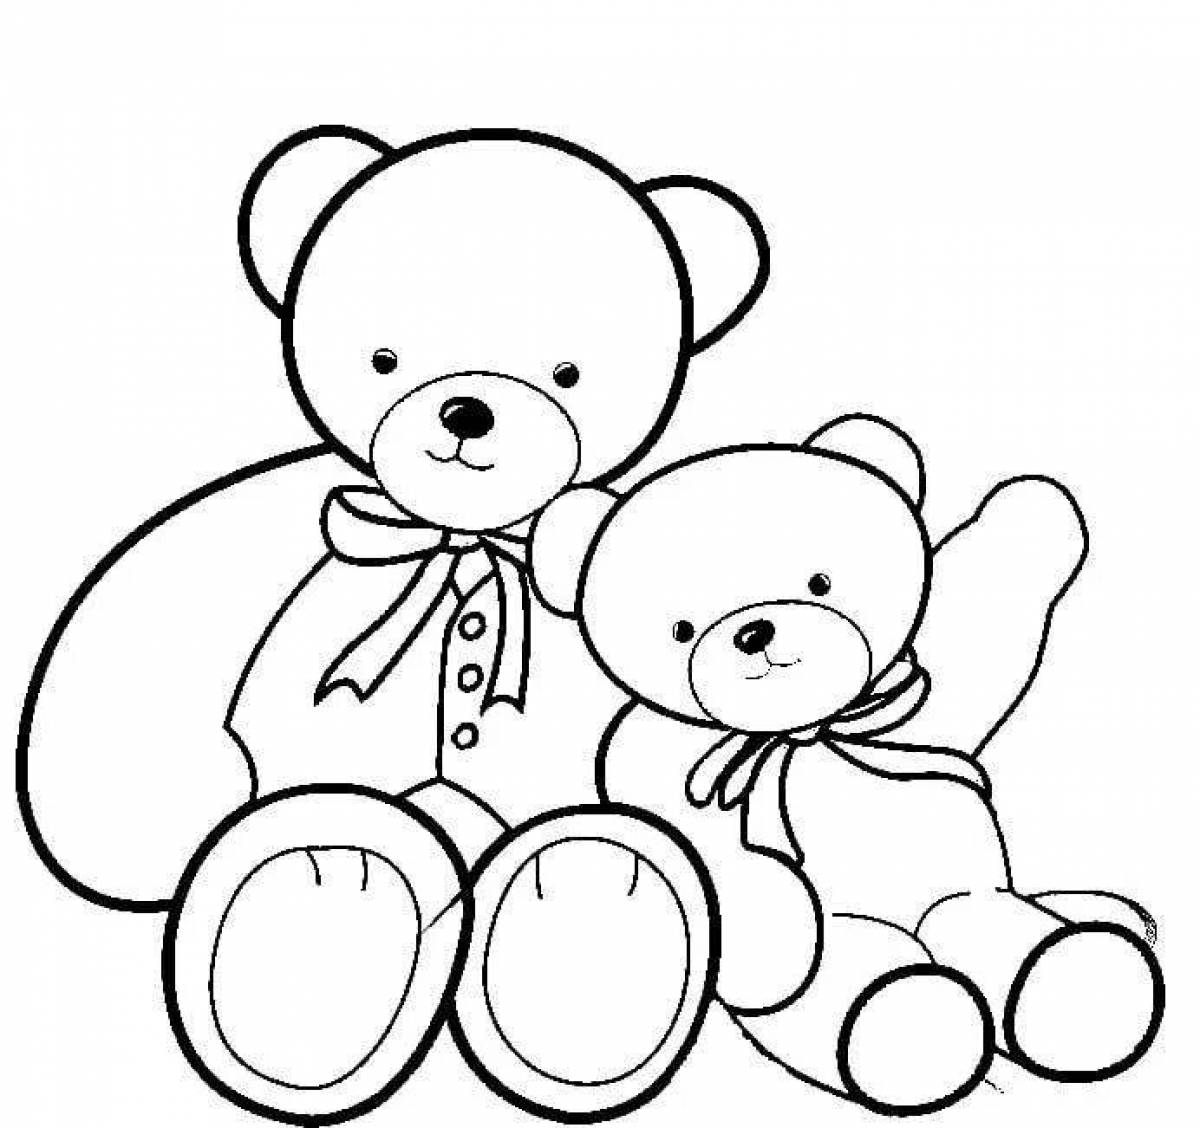 Teddy bear coloring book for kids games